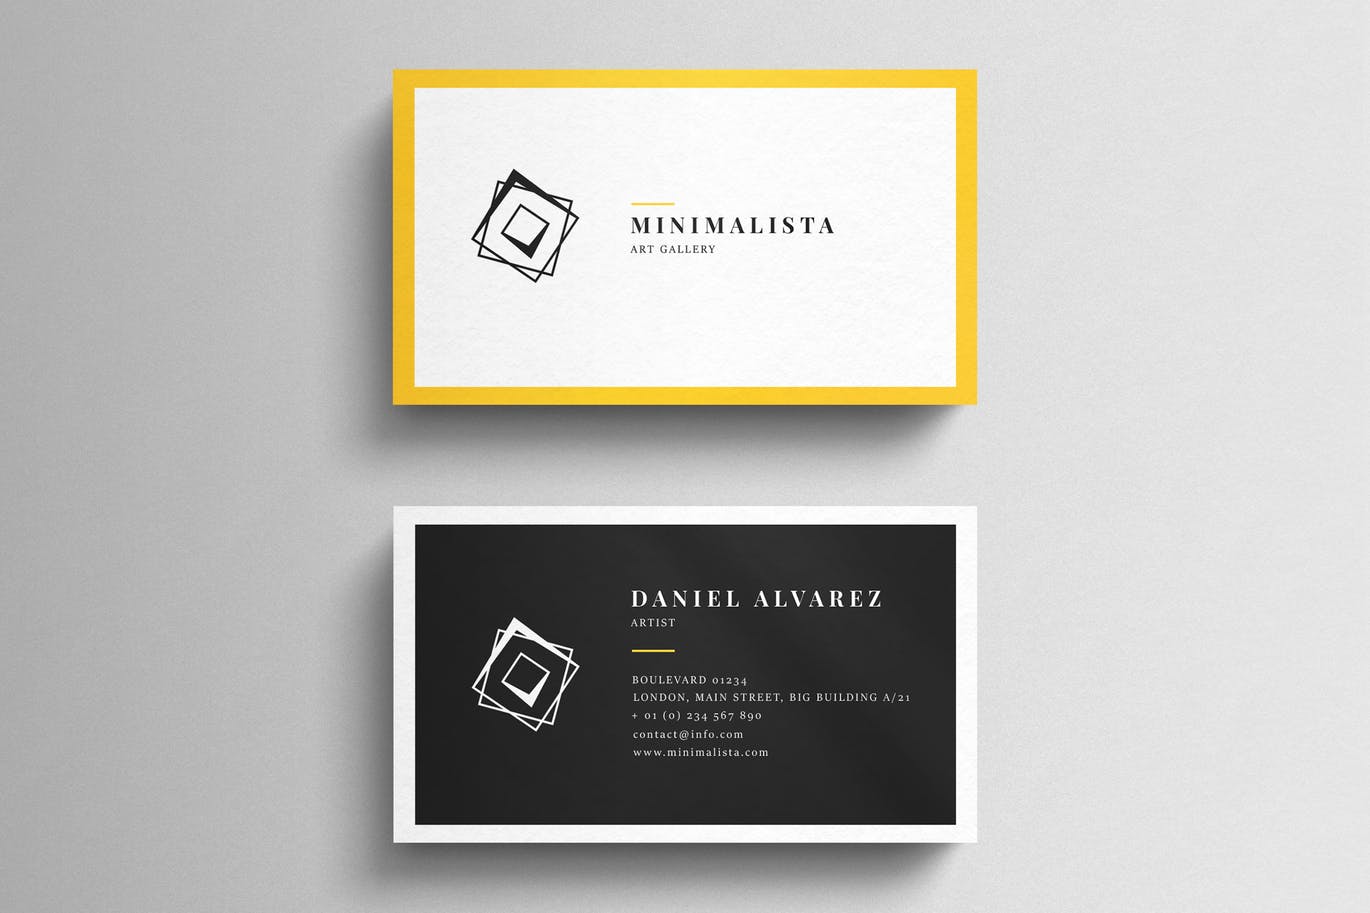 Minimal business card in yellow and white frames